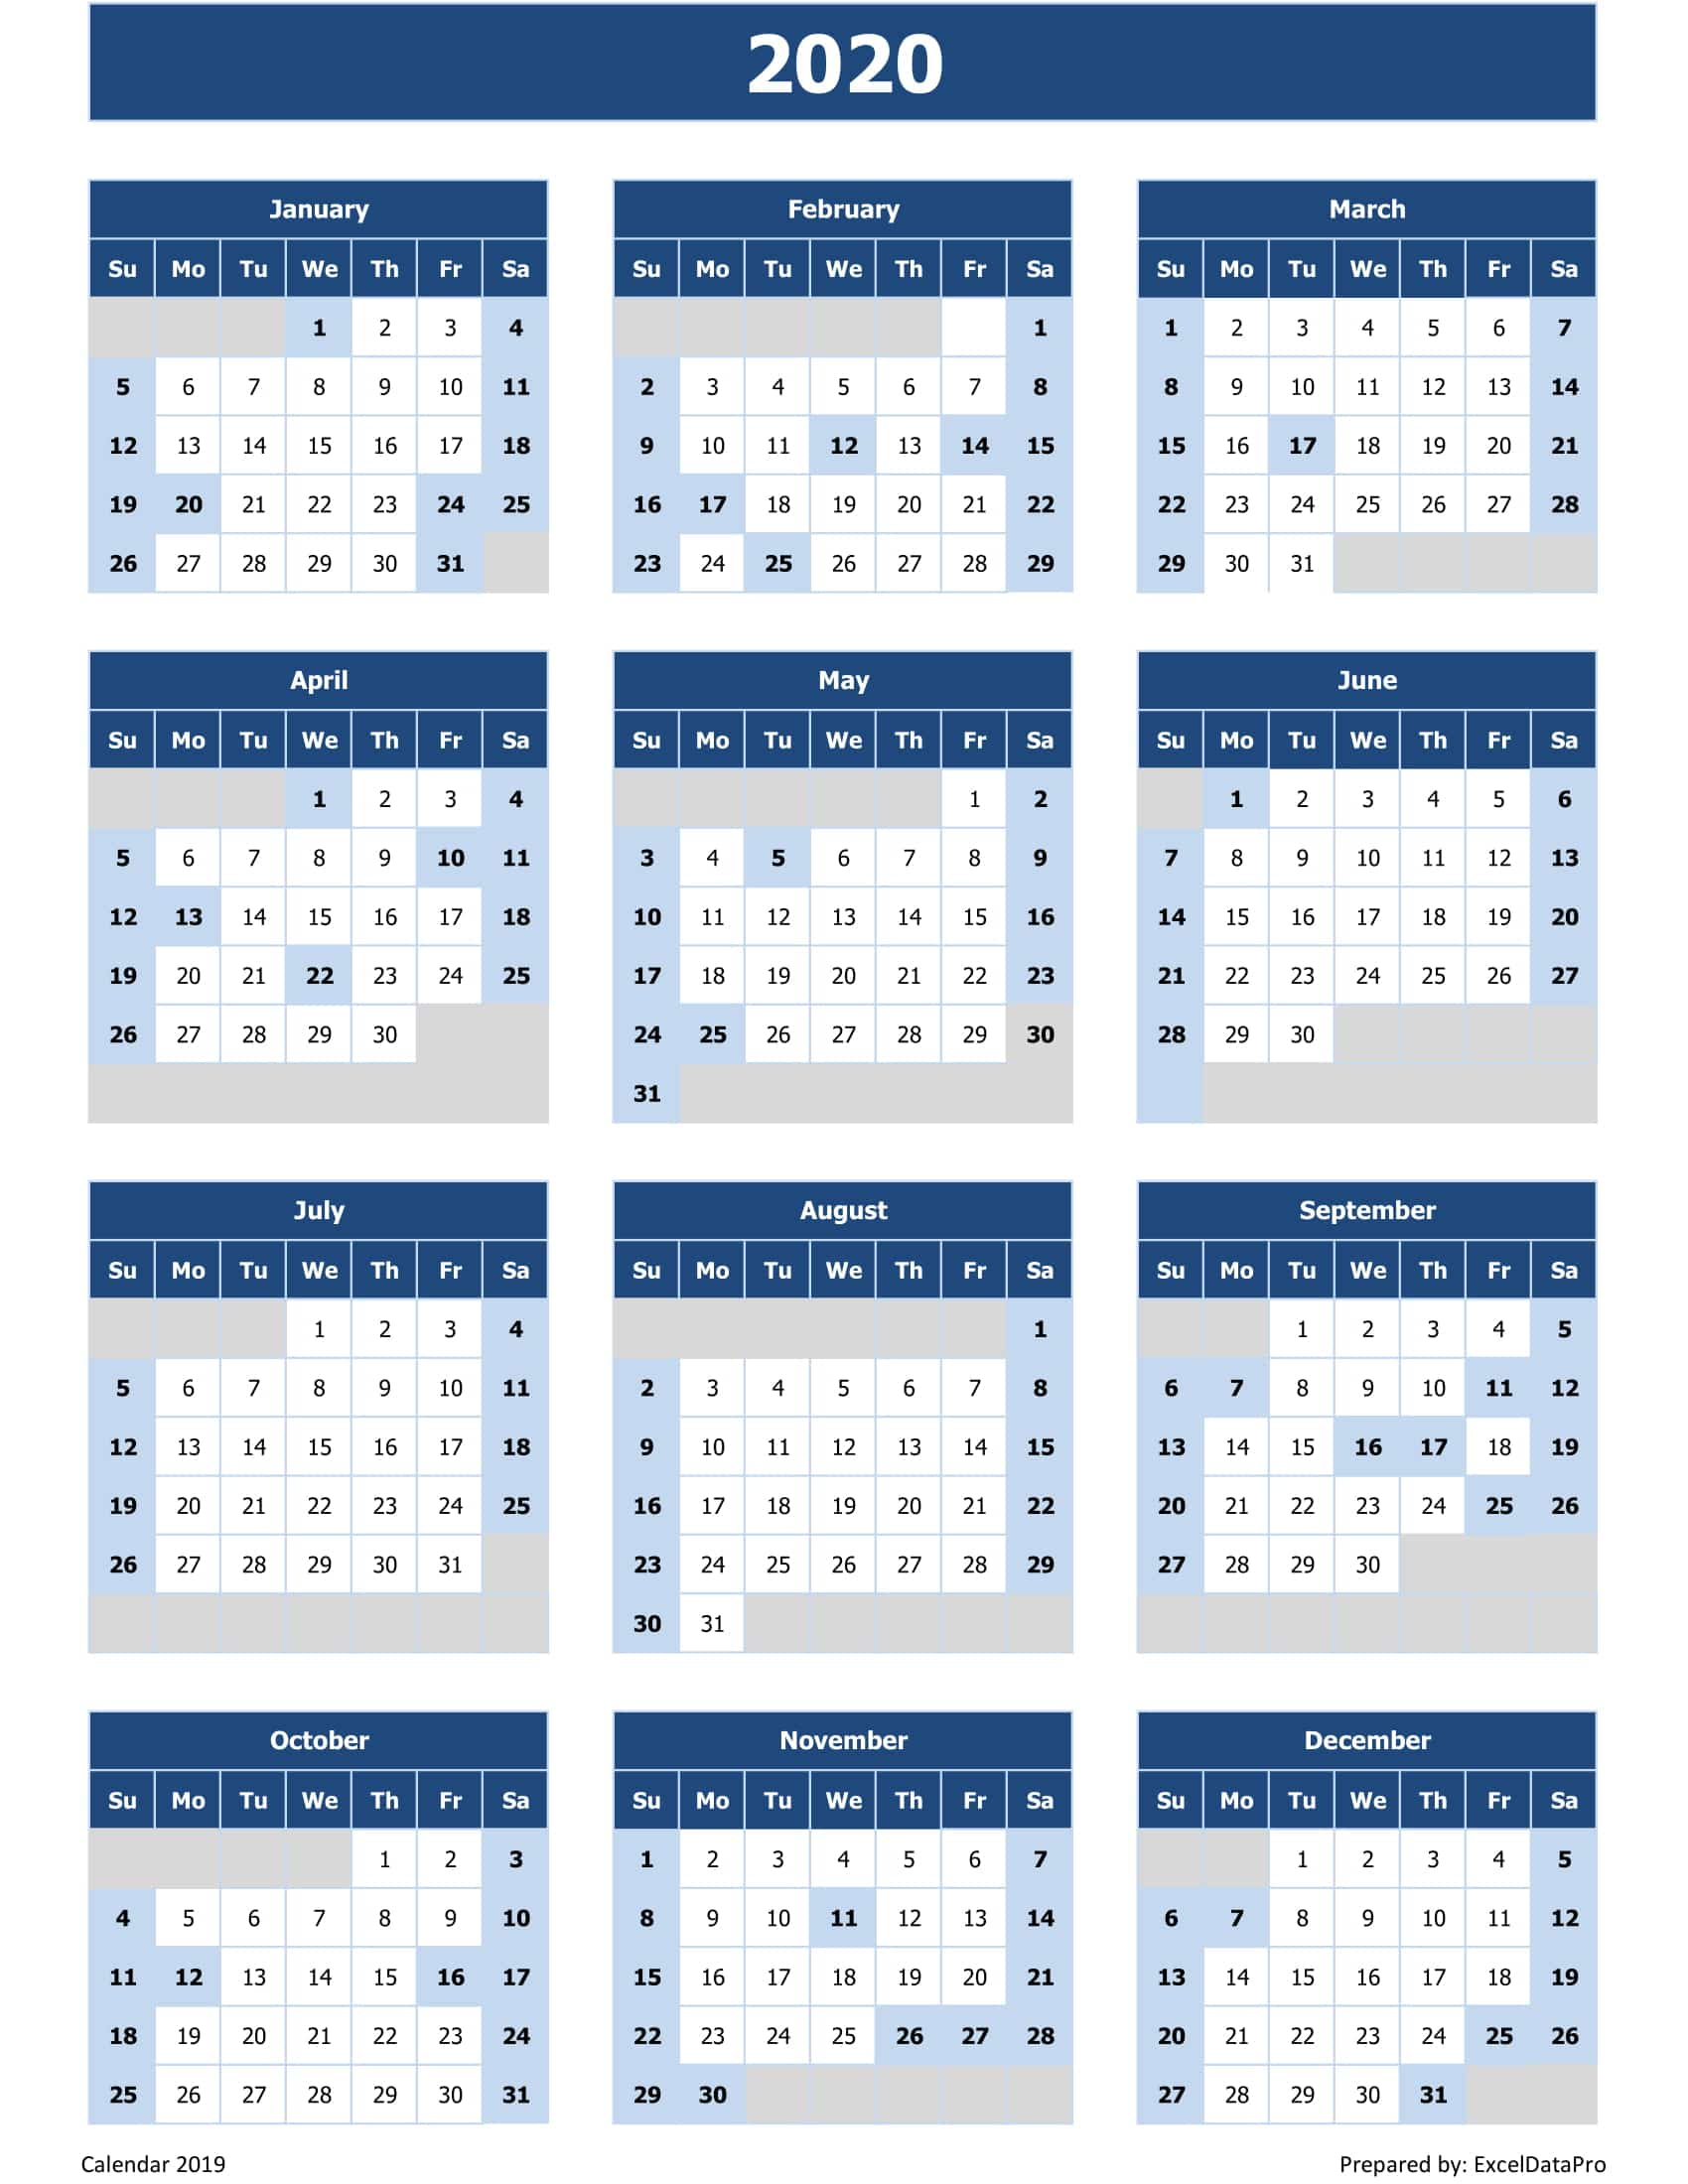 Download 2020 Yearly Calendar (Sun Start) Excel Template